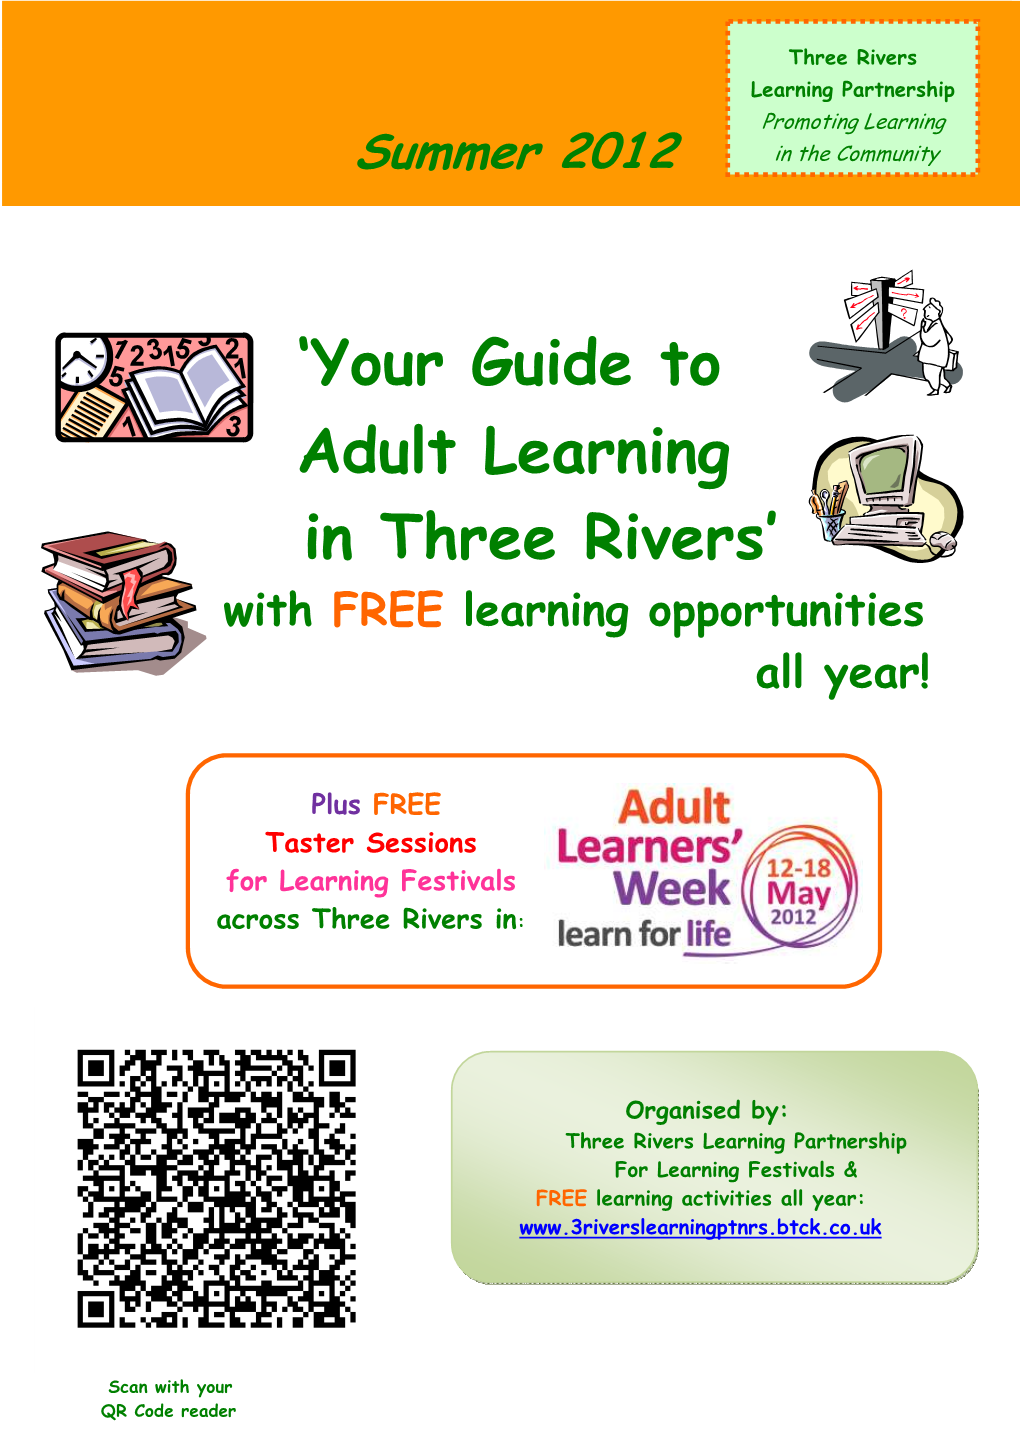 'Your Guide to Adult Learning in Three Rivers'